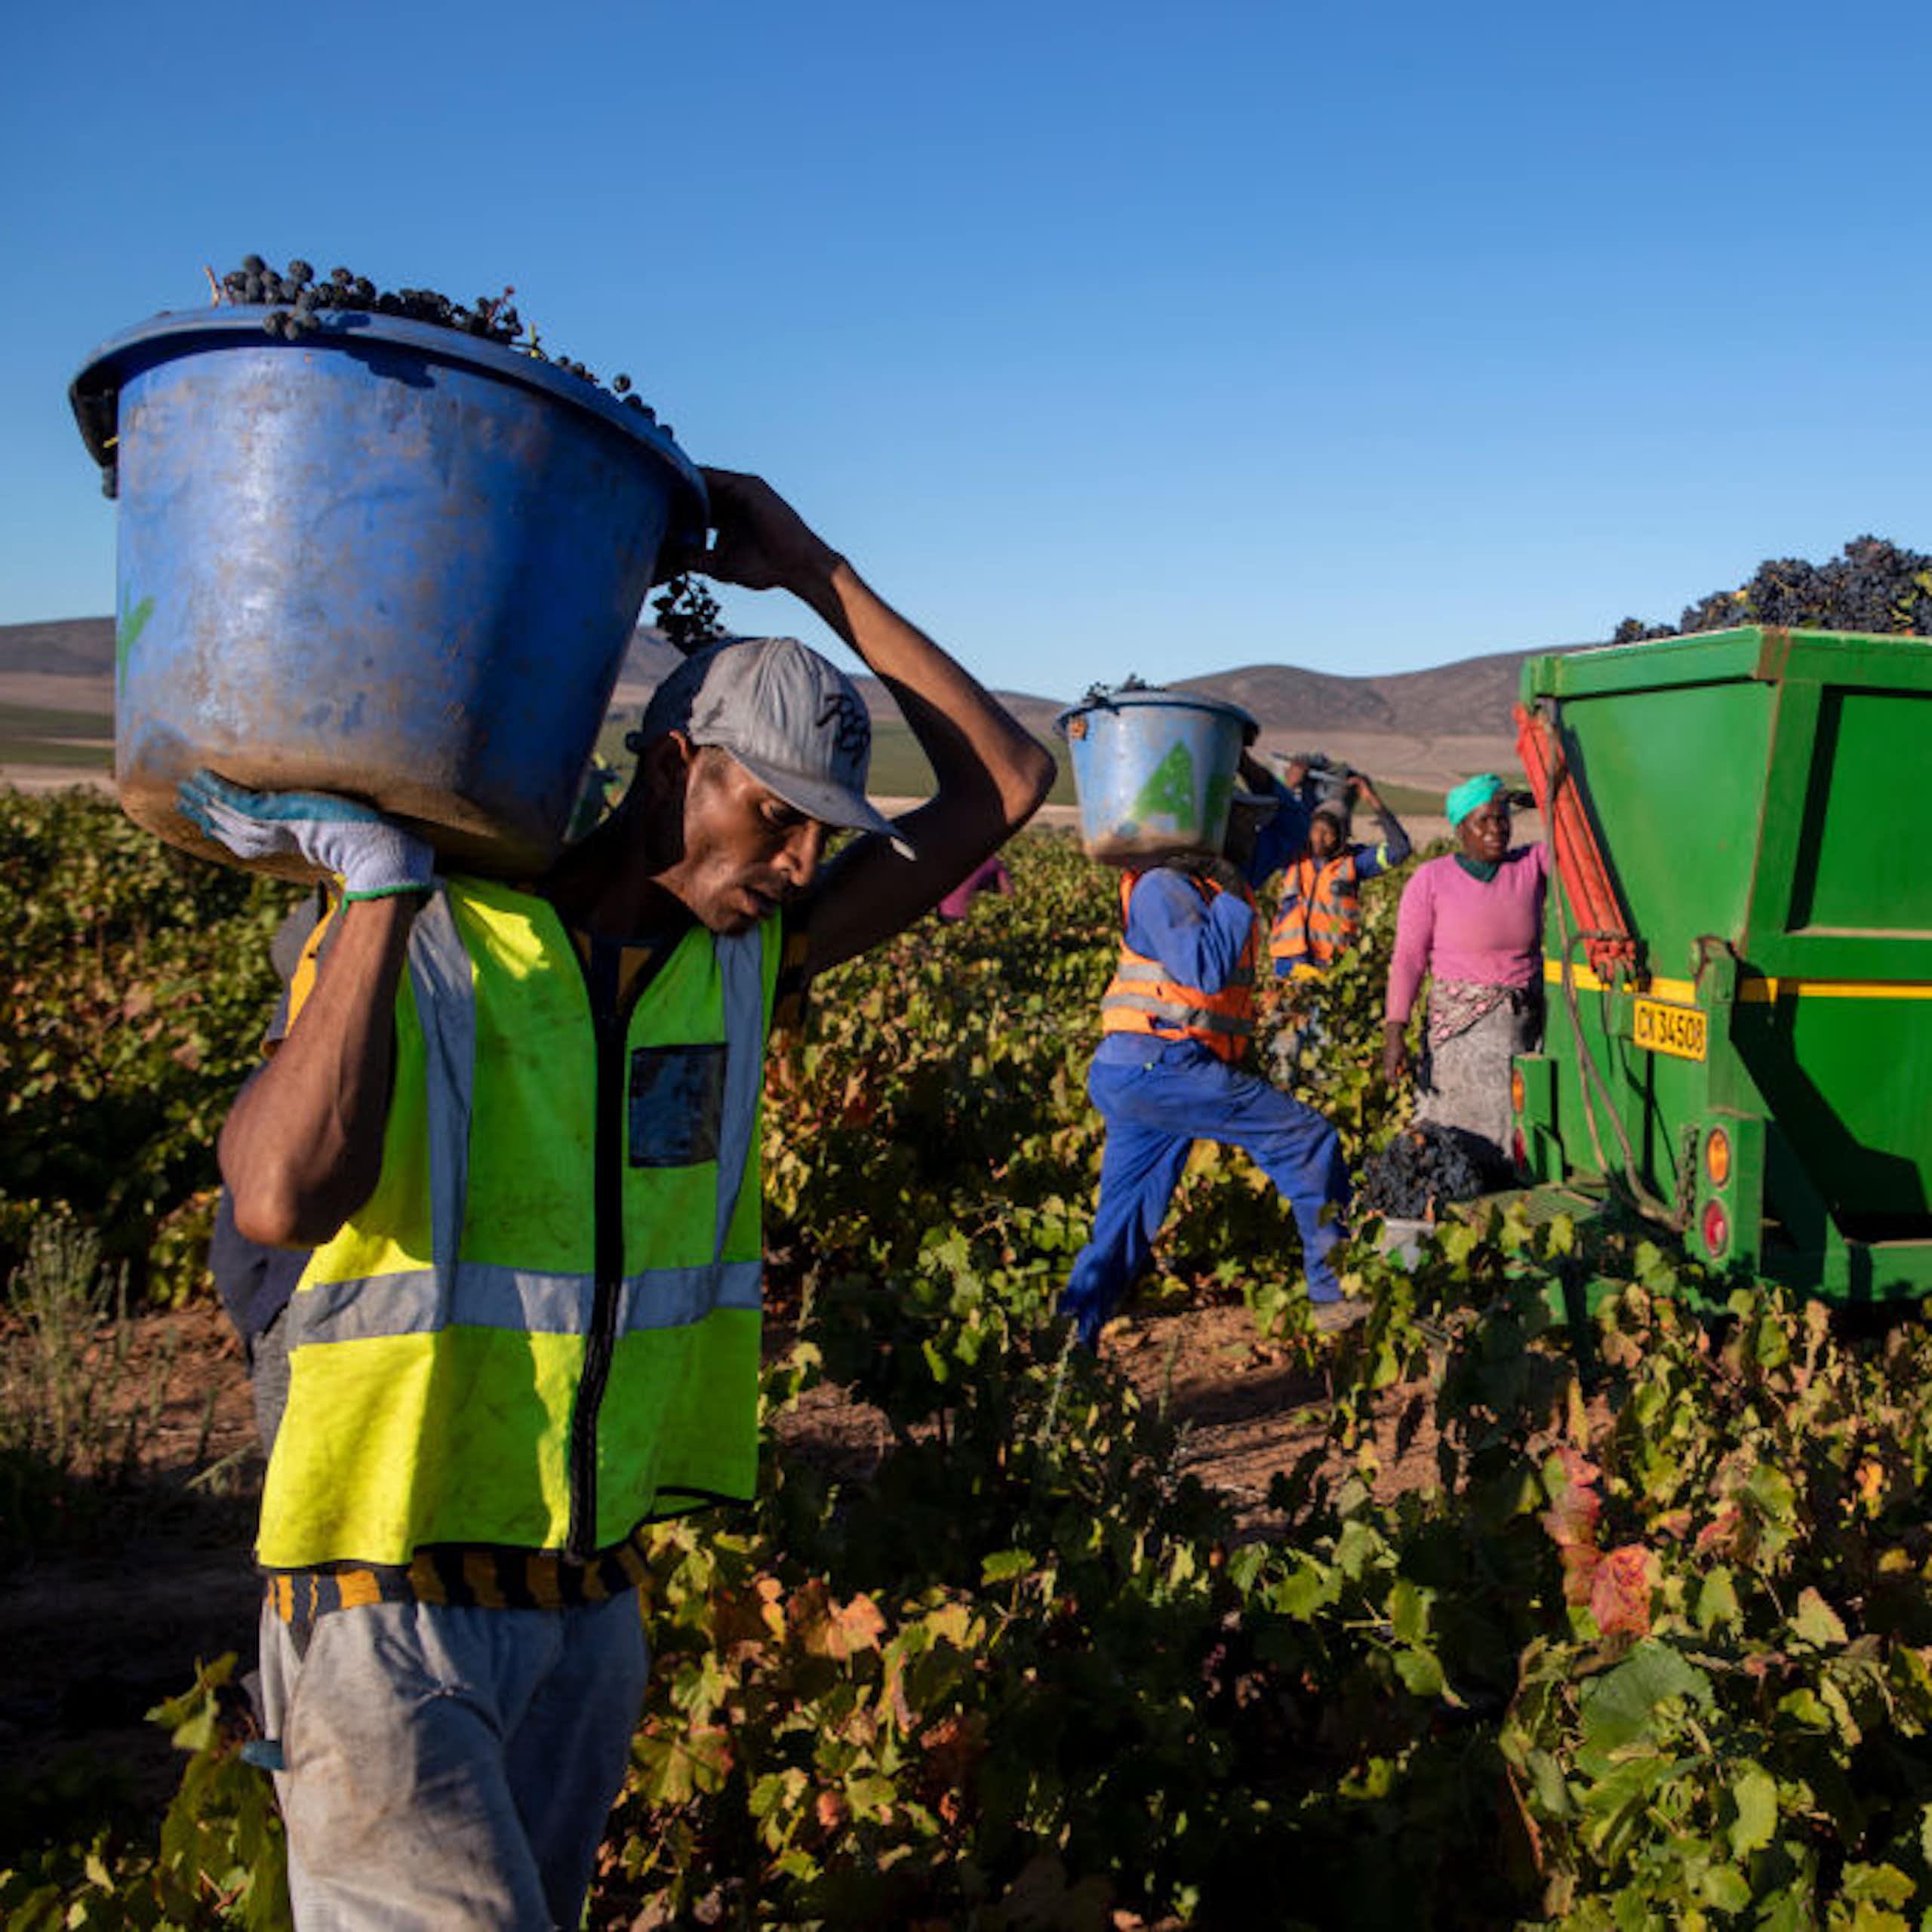 People carry buckets of grapes to a truck in a vineyard.